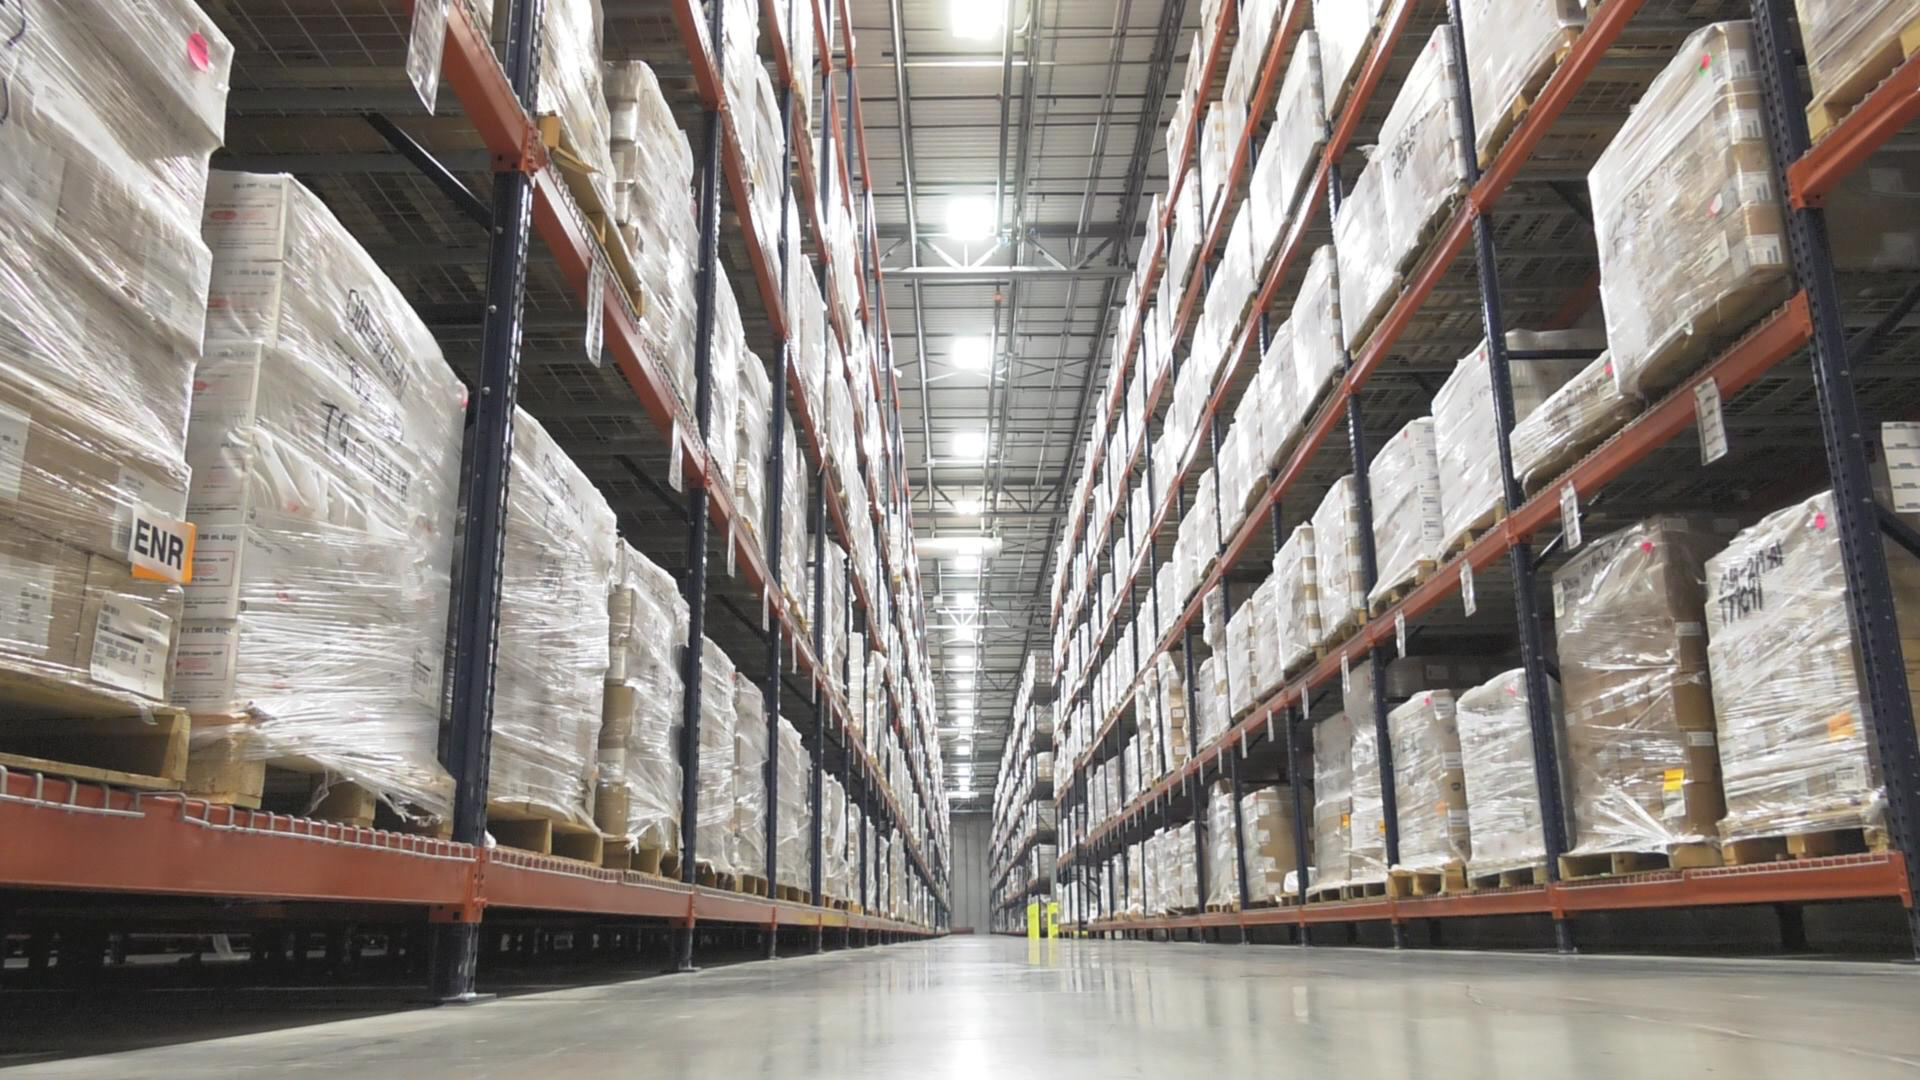 A warehouse view of the Strategic National Stockpile